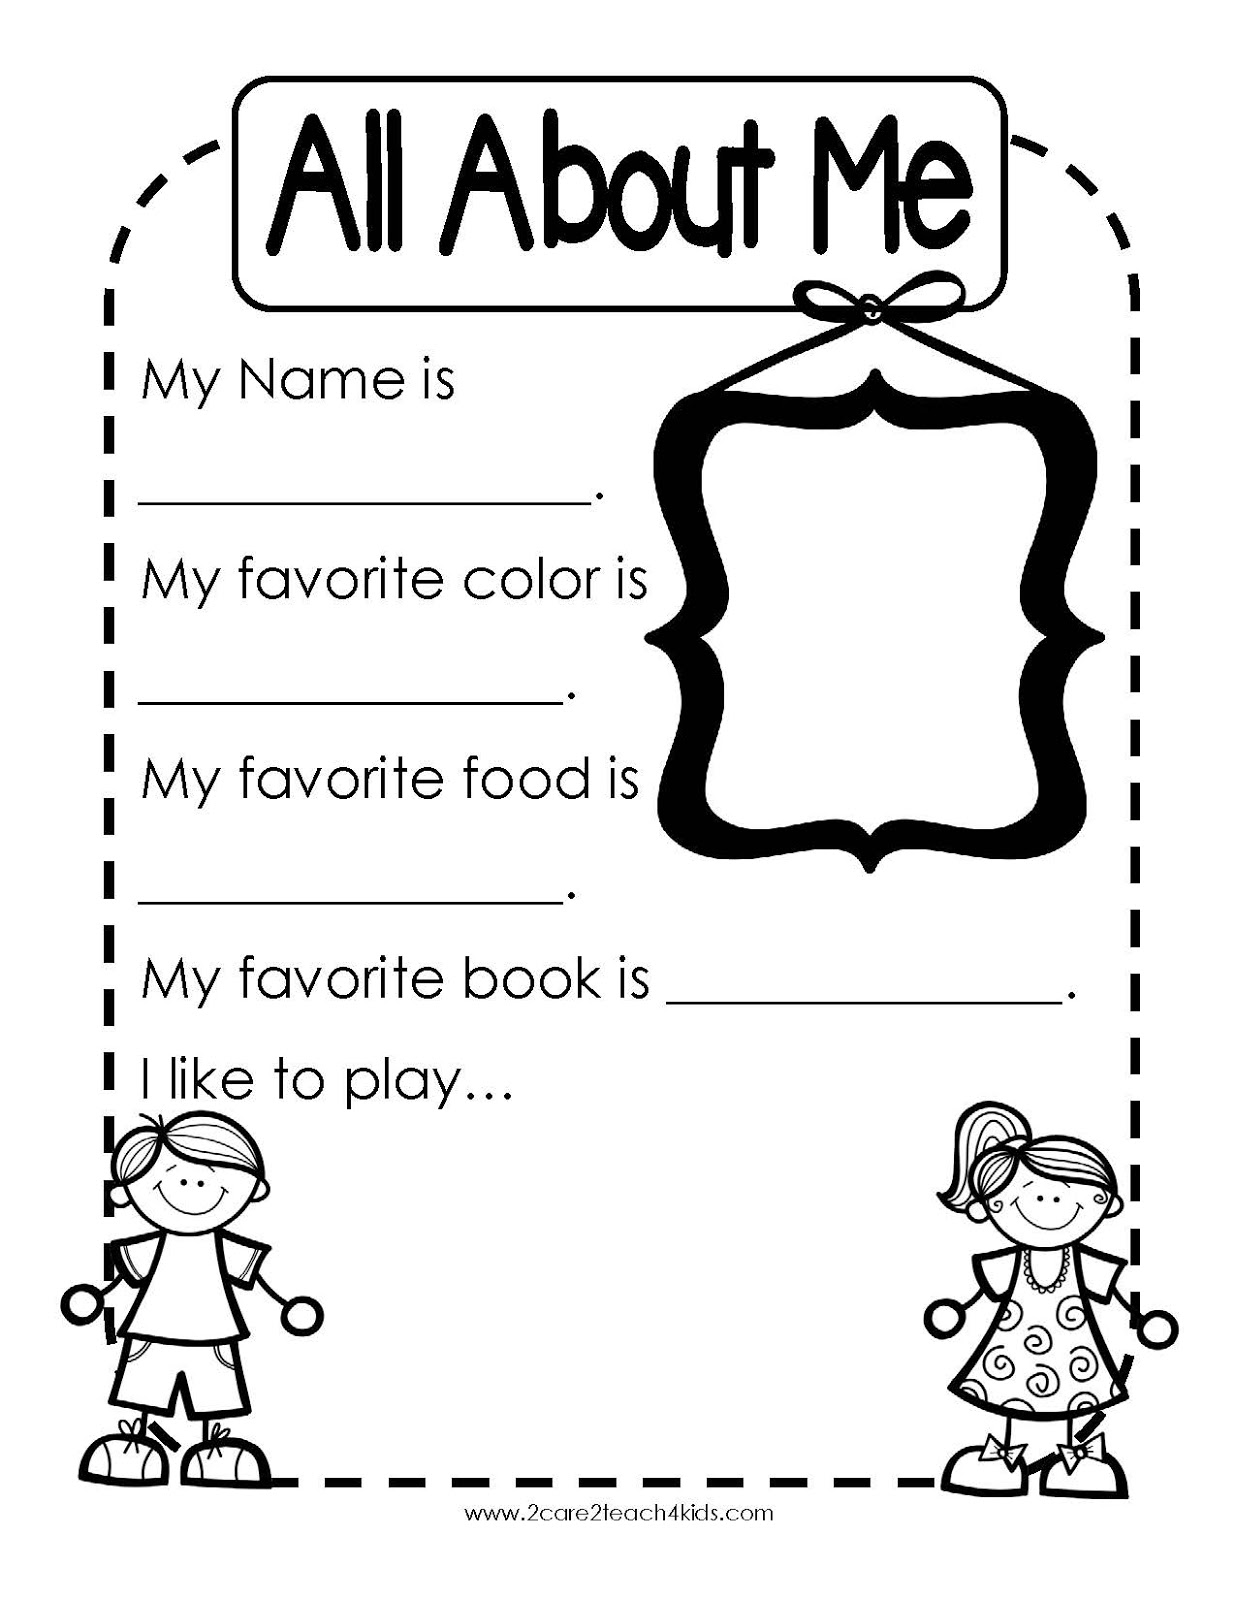 All About Me Template Preschool Mark Library